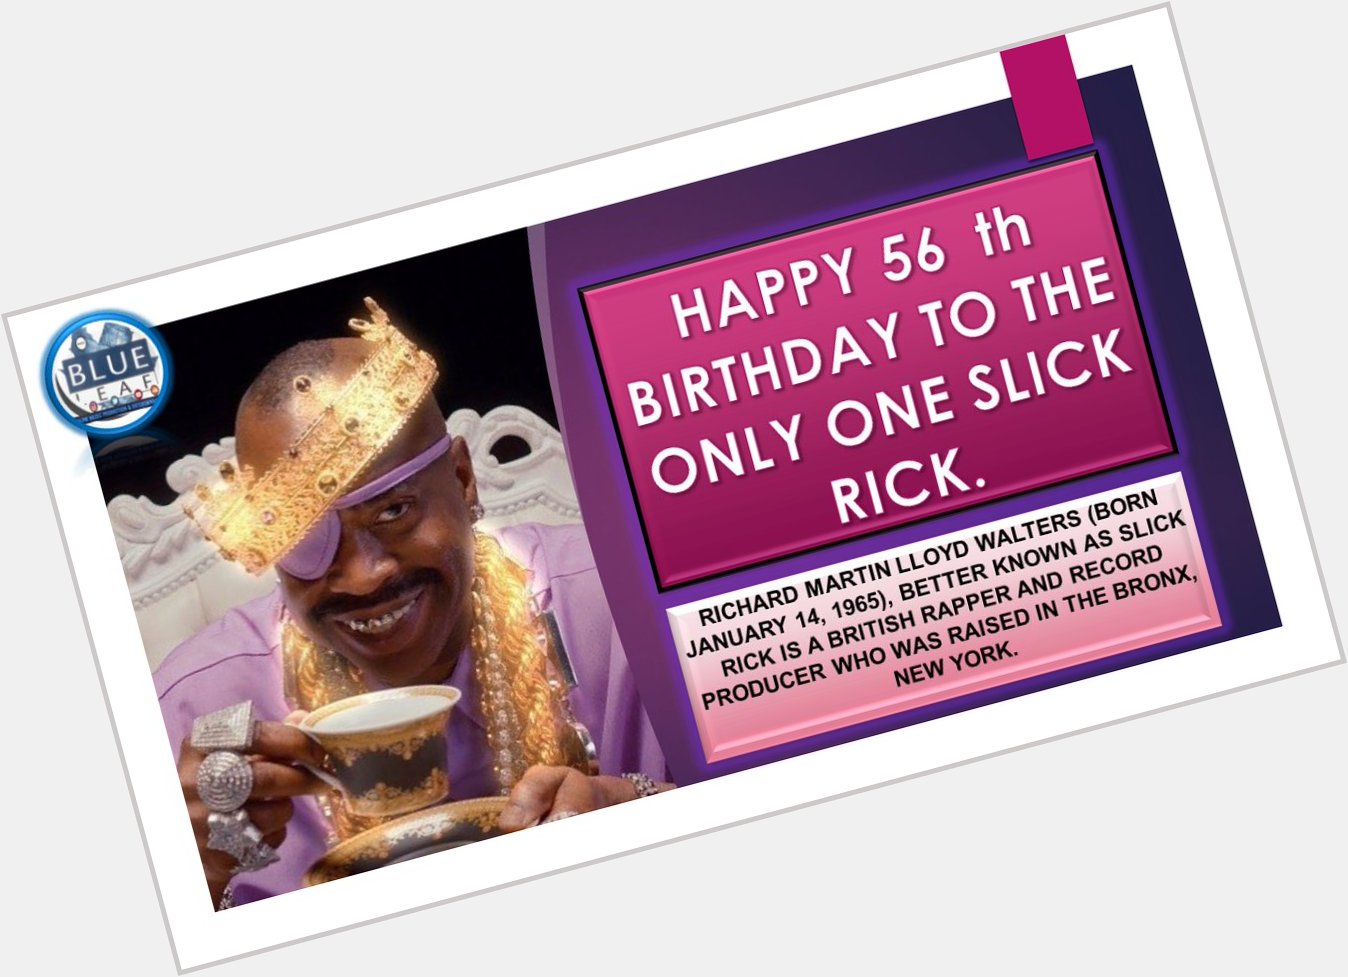 HAPPY 56 th BIRTHDAY TO THE ONLY ONE SLICK RICK.    